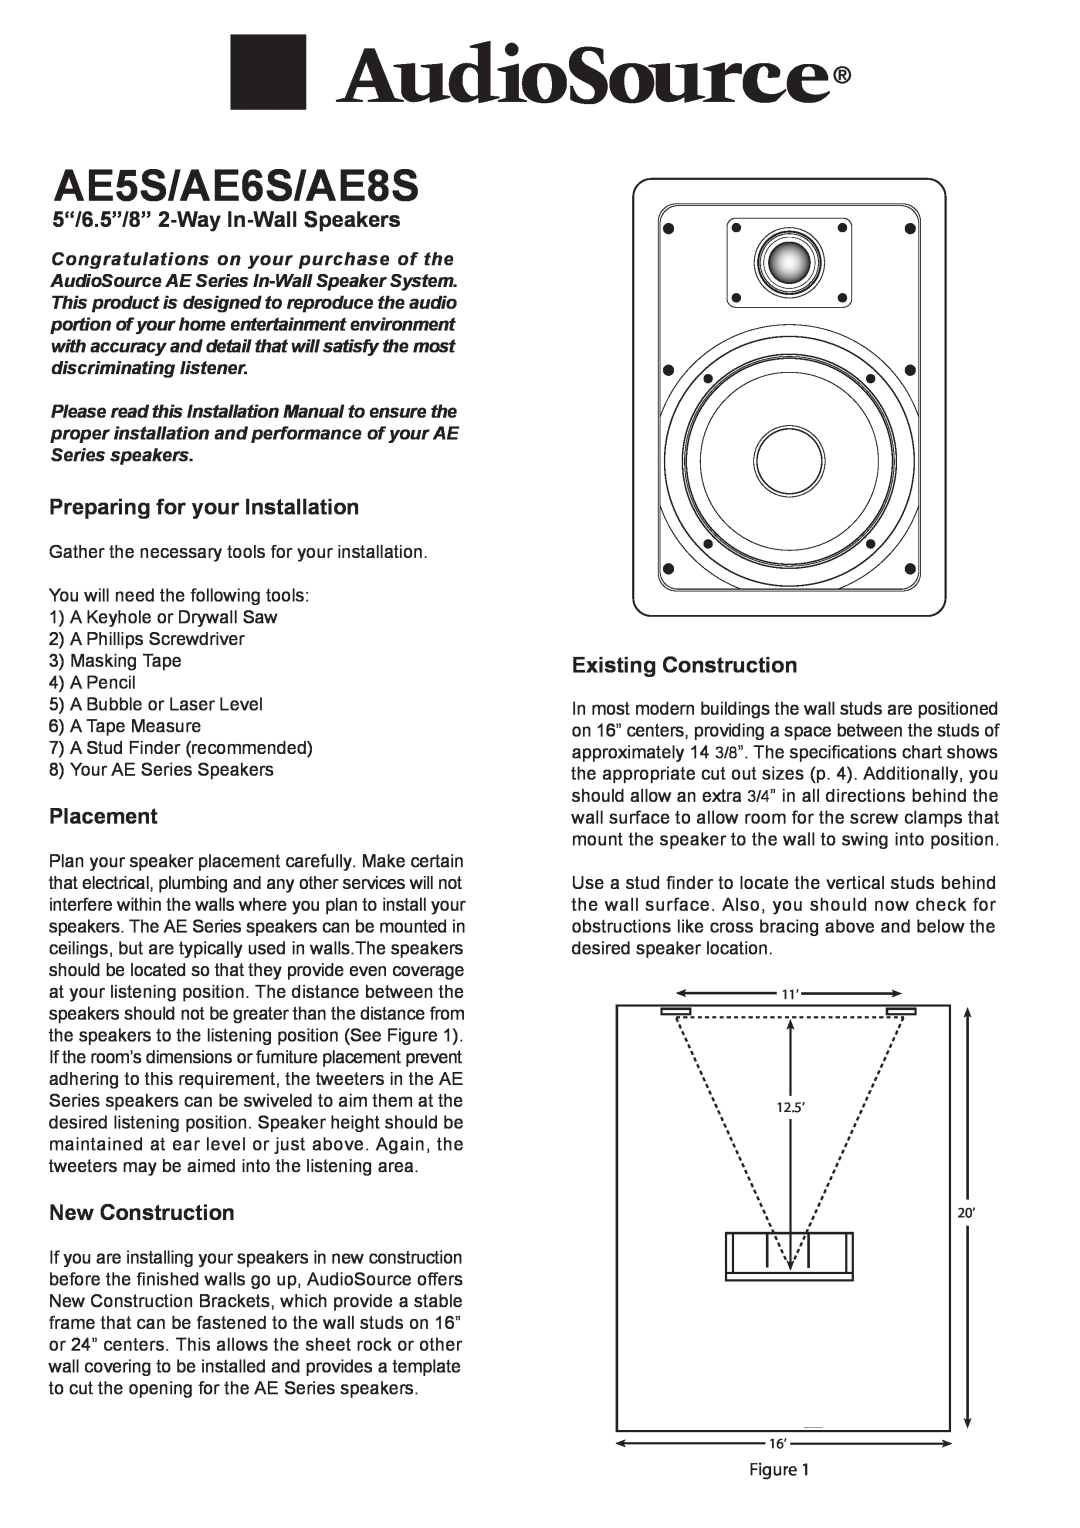 AudioSource AE8S, AE6S installation manual 5“/6.5”/8” 2-Way In-WallSpeakers, Preparing for your Installation, Placement 